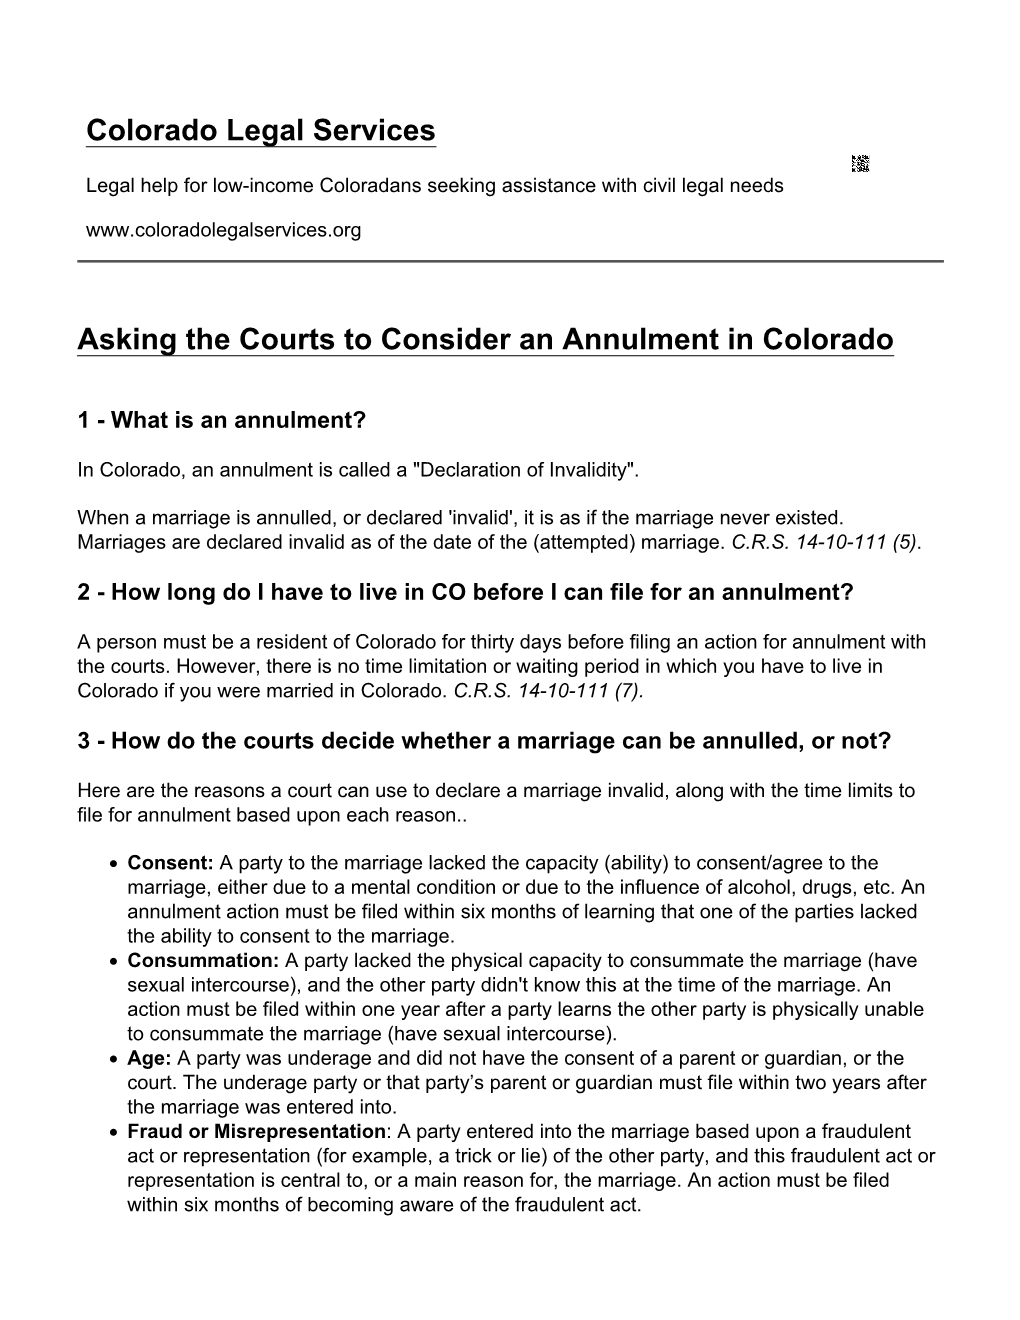 Asking the Courts to Consider an Annulment in Colorado